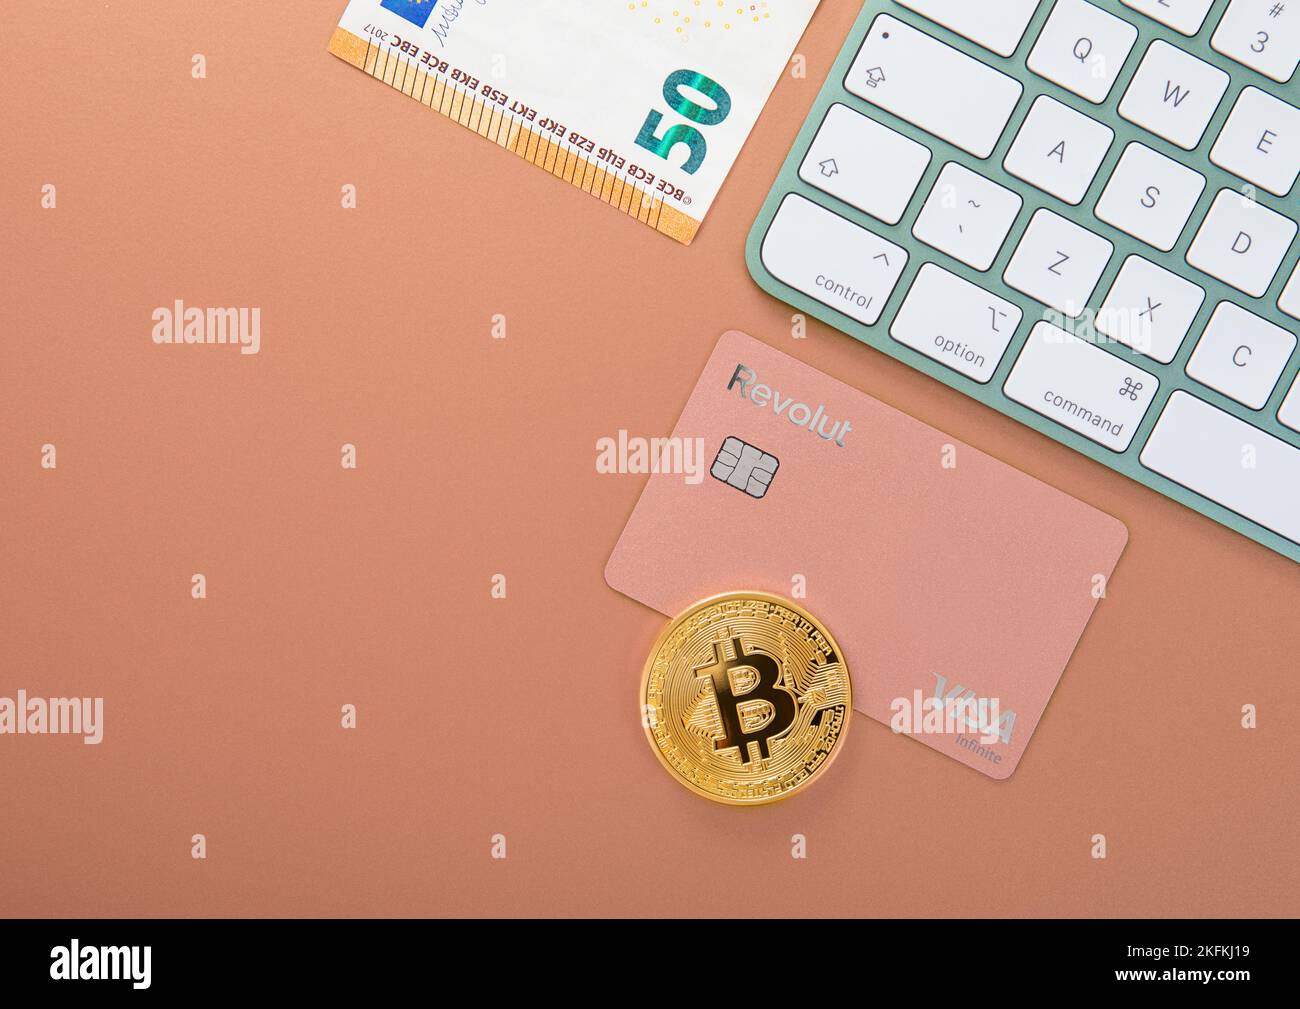 LONDON,UK - NOVEMBER 12, 2022: Revolut visa card with bitcoin and keyboard on bronze background with fifty euro bill. Top view. Stock Photo